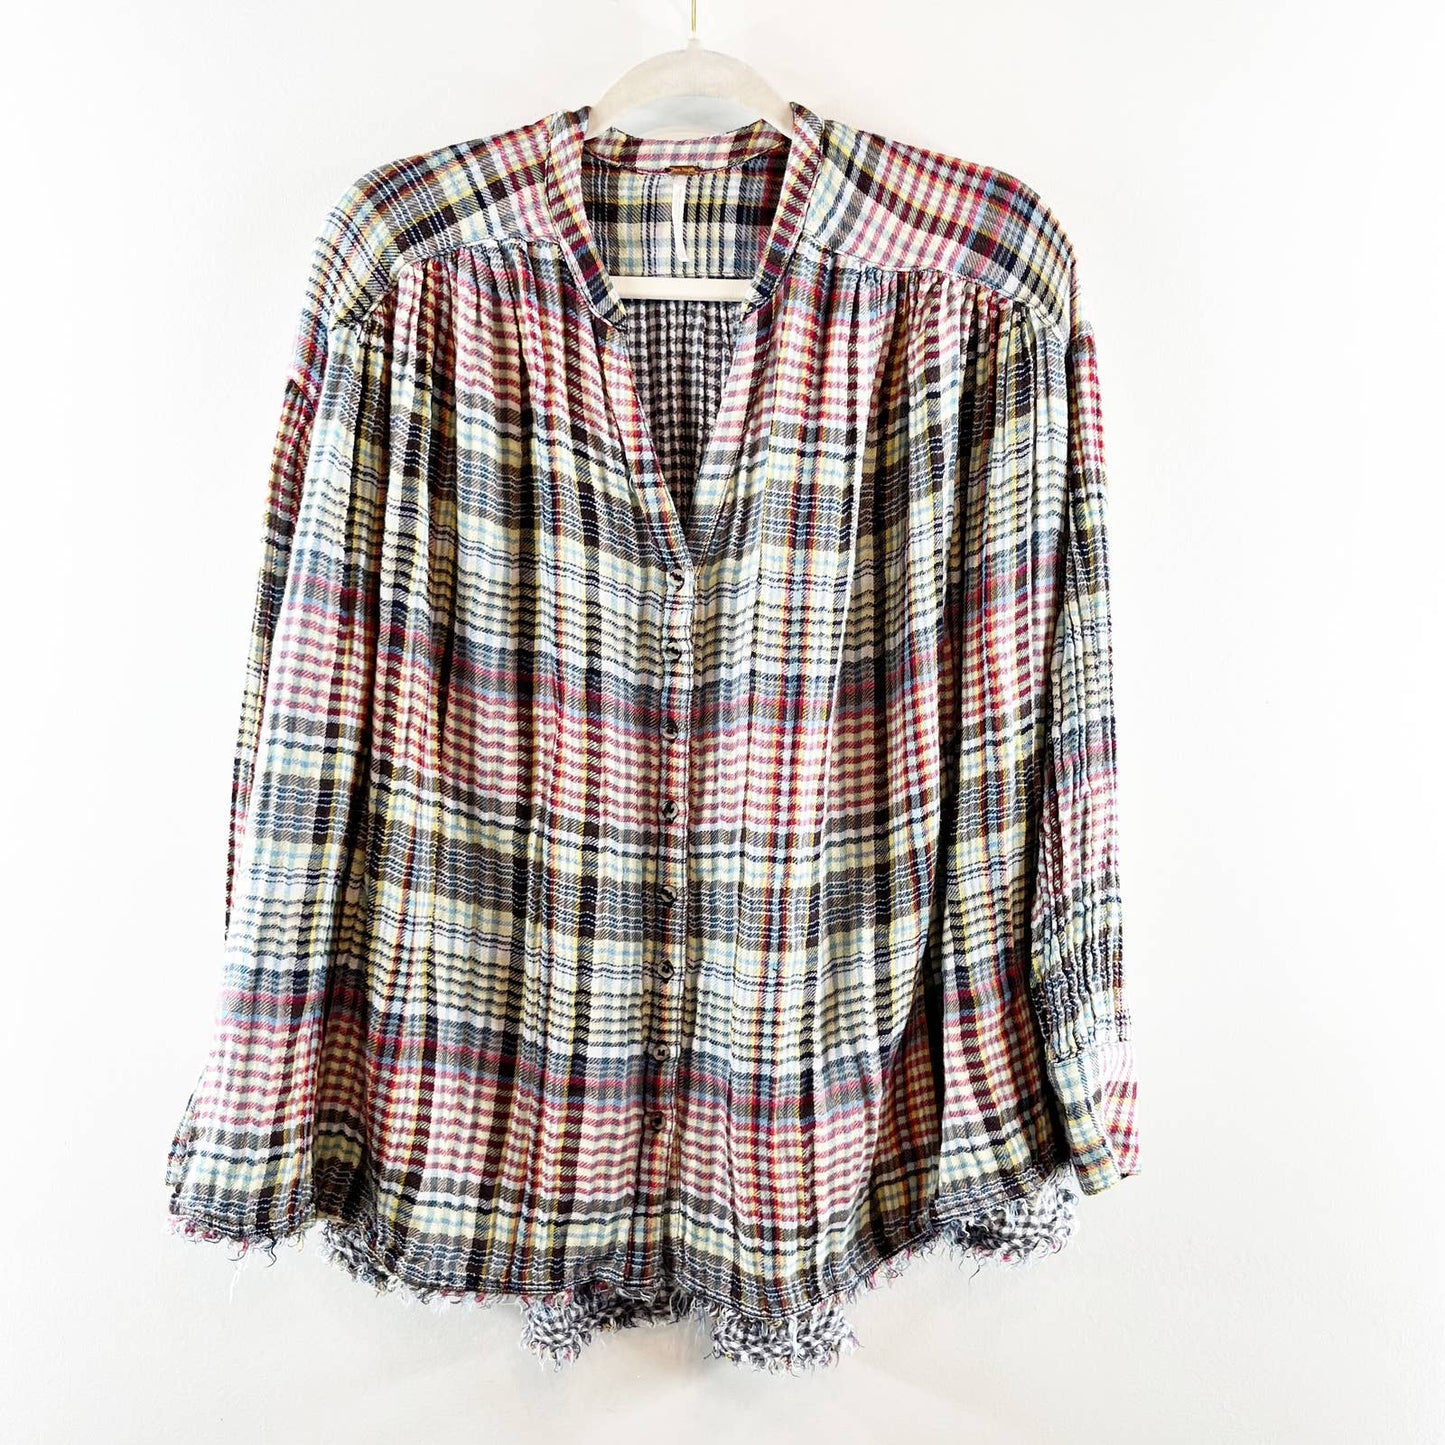 Free People Come On Over Plaid Oversized Flannel Top Shirt Pink Gray XS